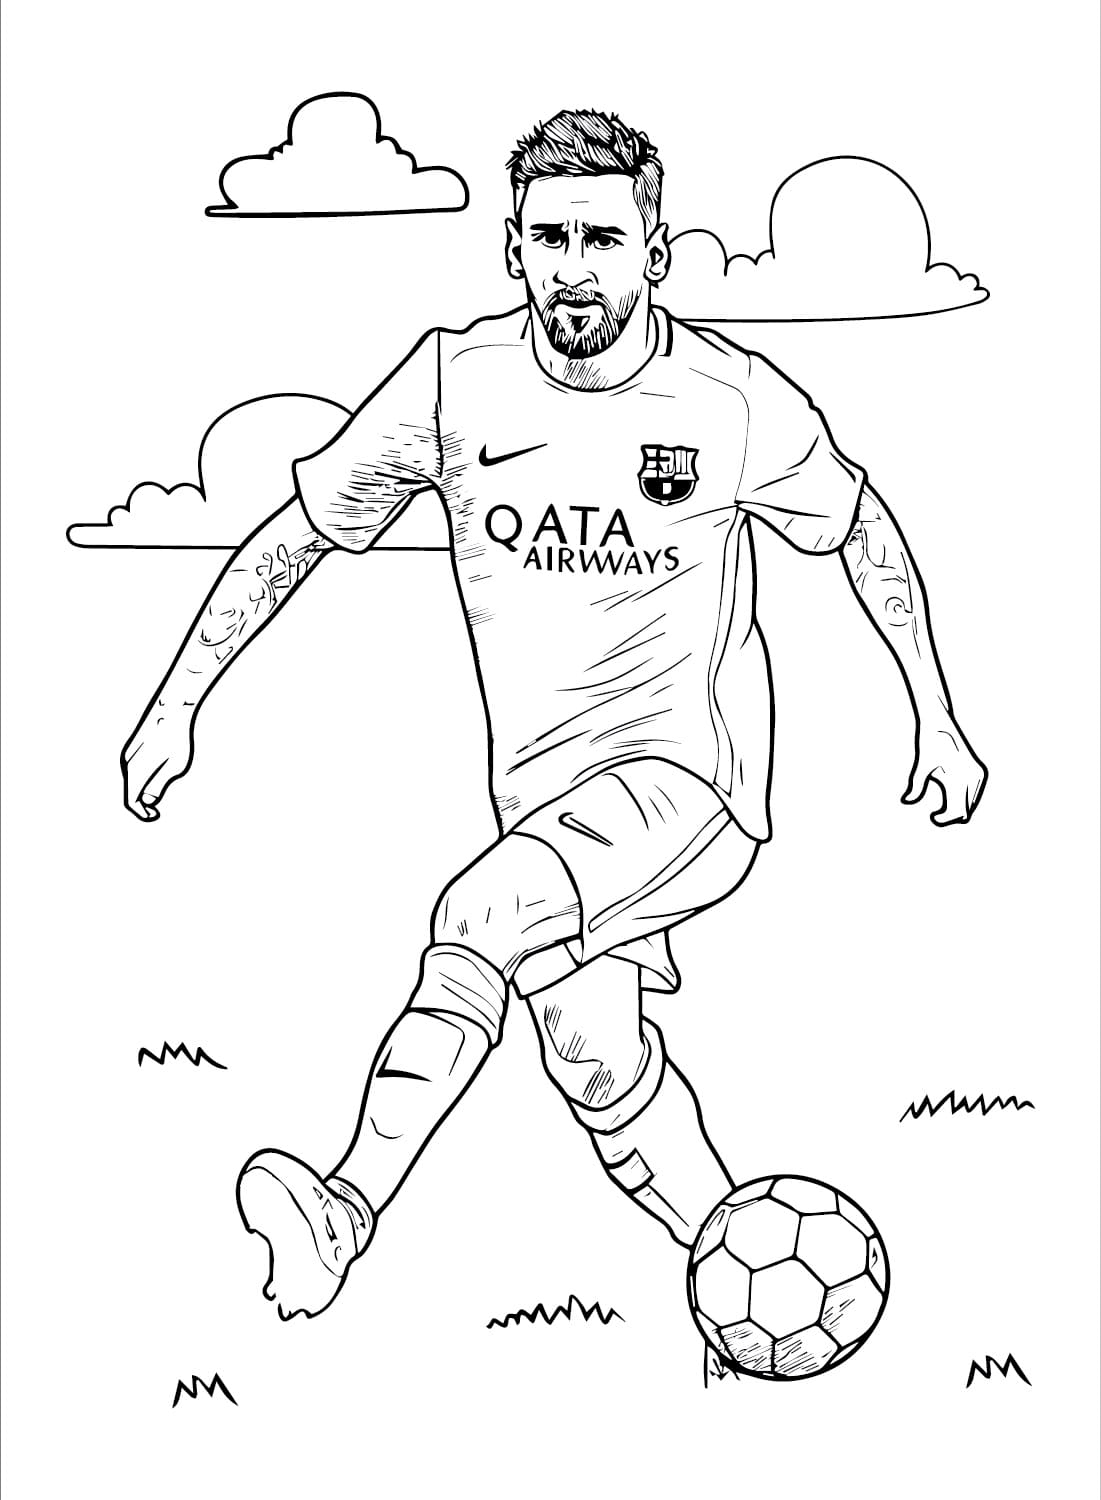 Awesome Messi coloring page - Download, Print or Color Online for Free